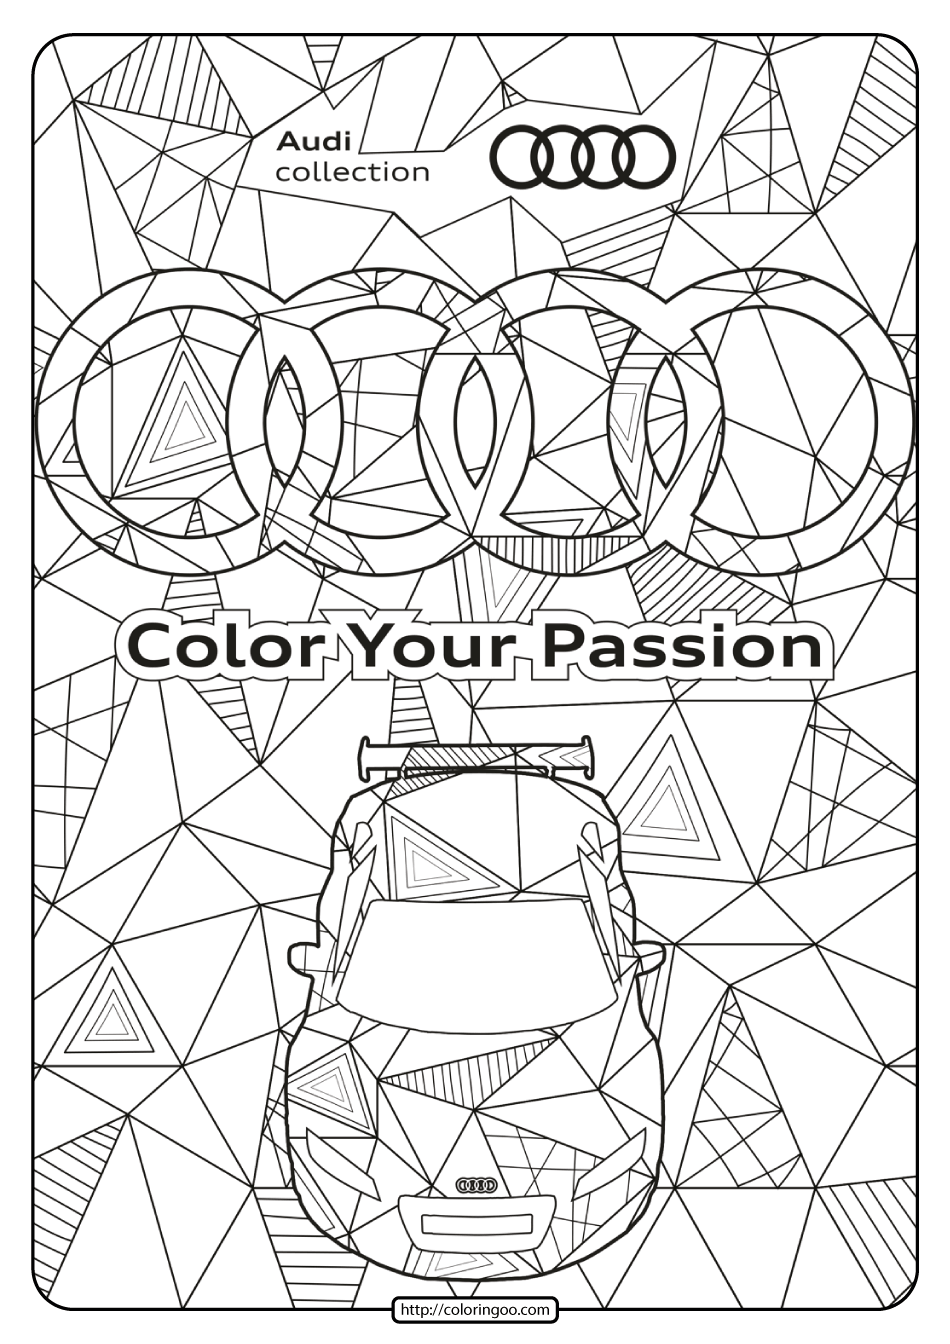 Printable Audi Cars Coloring Book & Page - 01